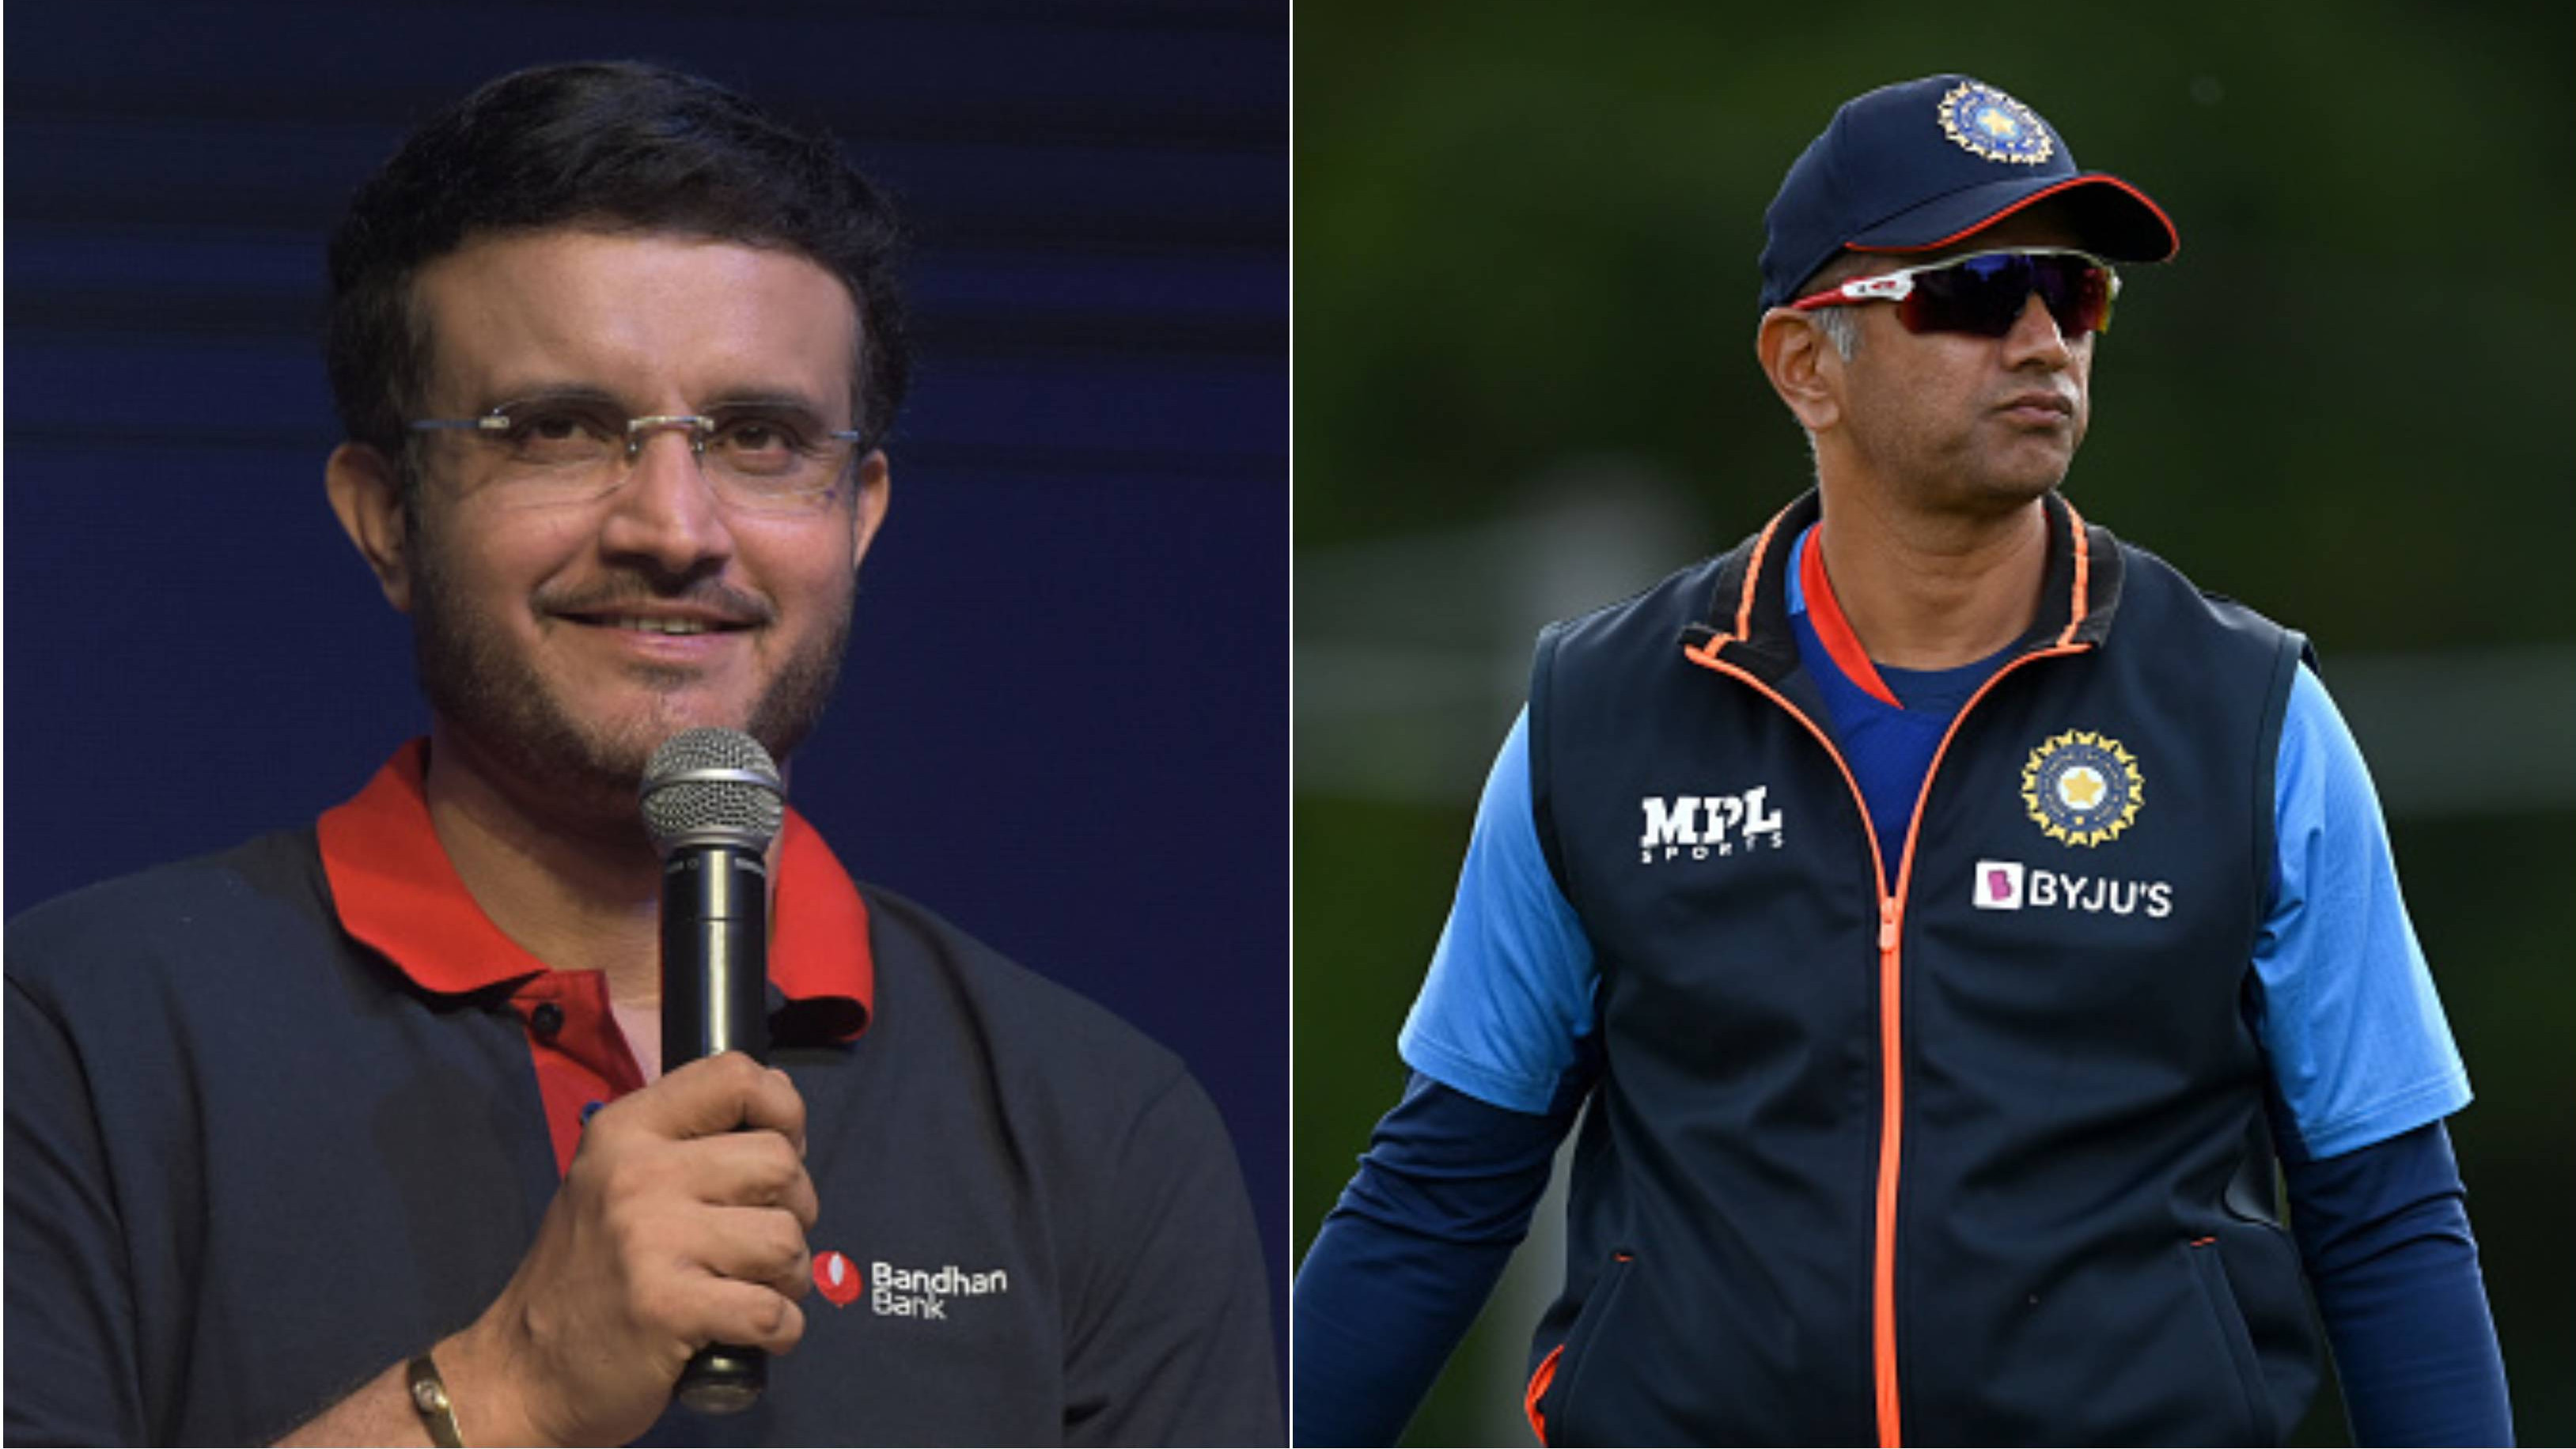 “He has done very well except for the T20 World Cup,” Ganguly weighs in on Dravid’s performance as India coach